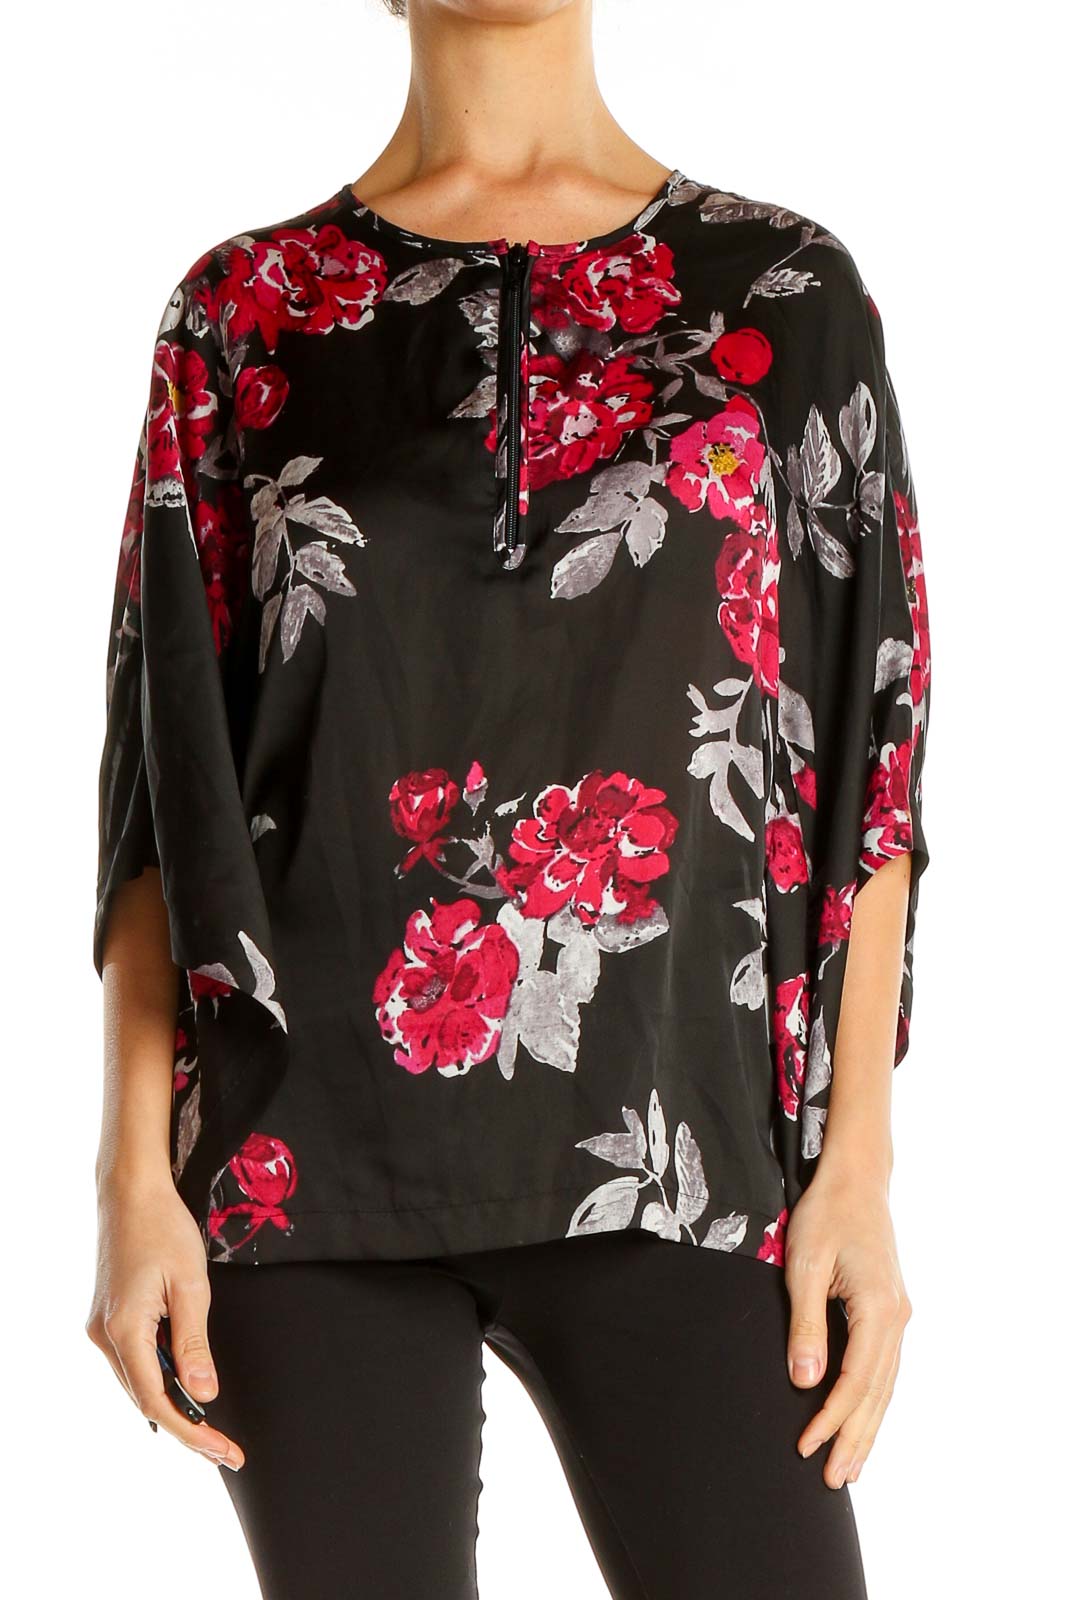 Black Floral Print Casual Top Front